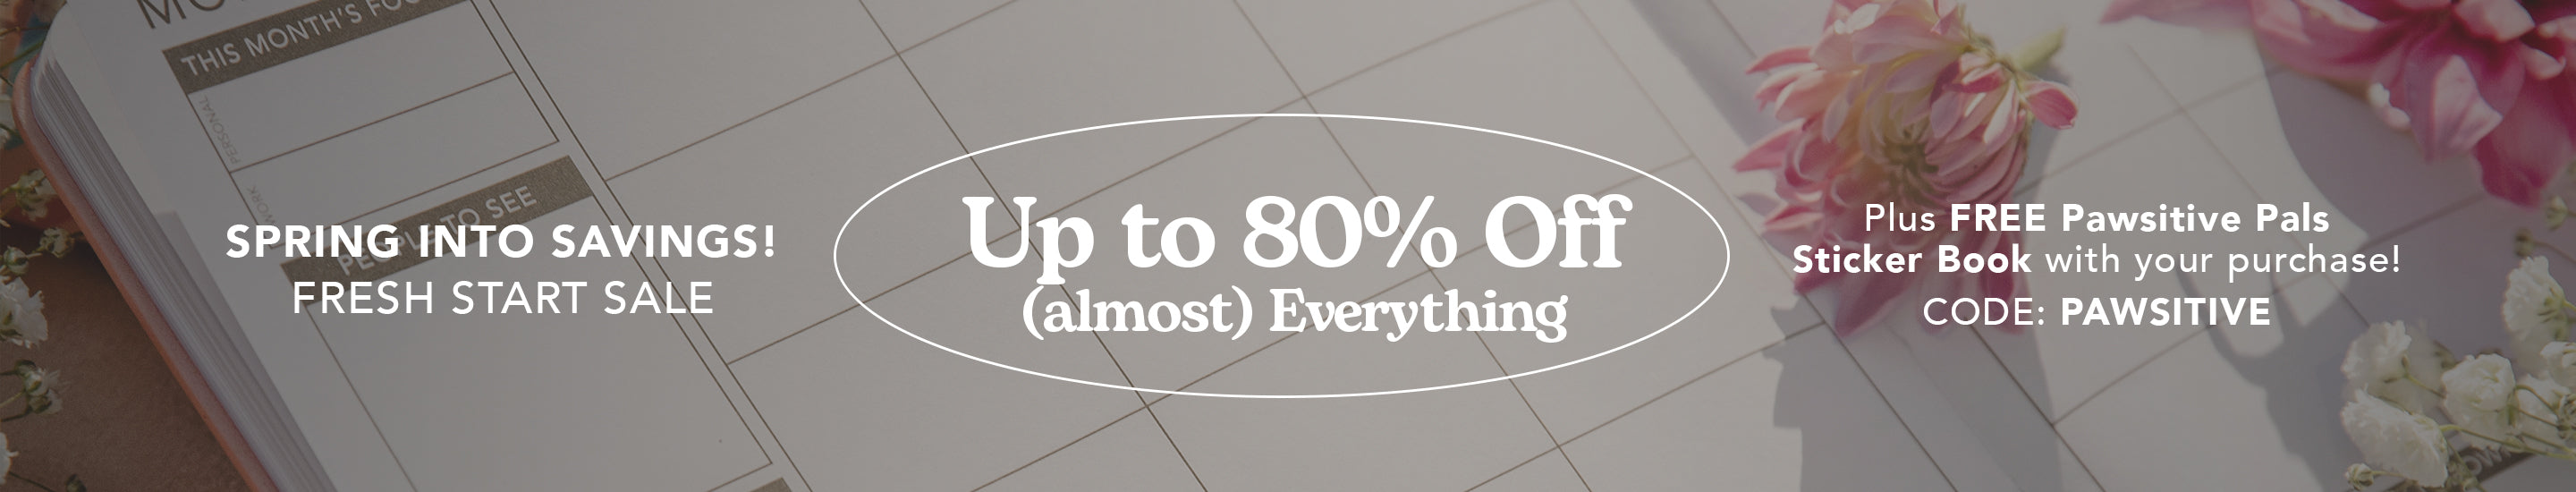 Up to 80% OFF